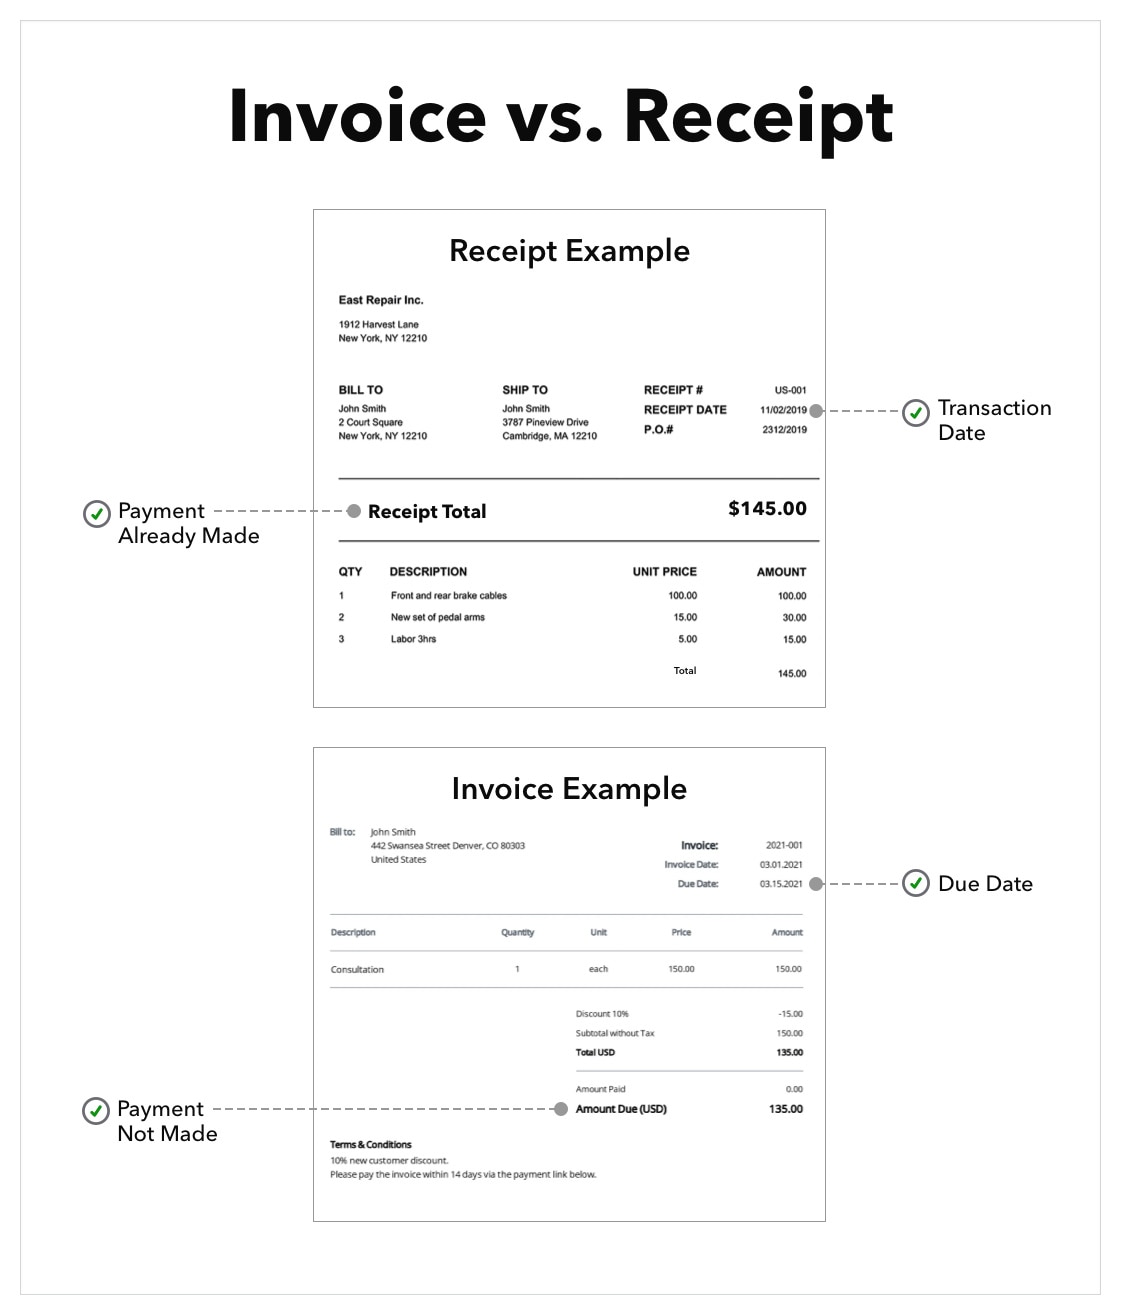 invoice and receipt difference